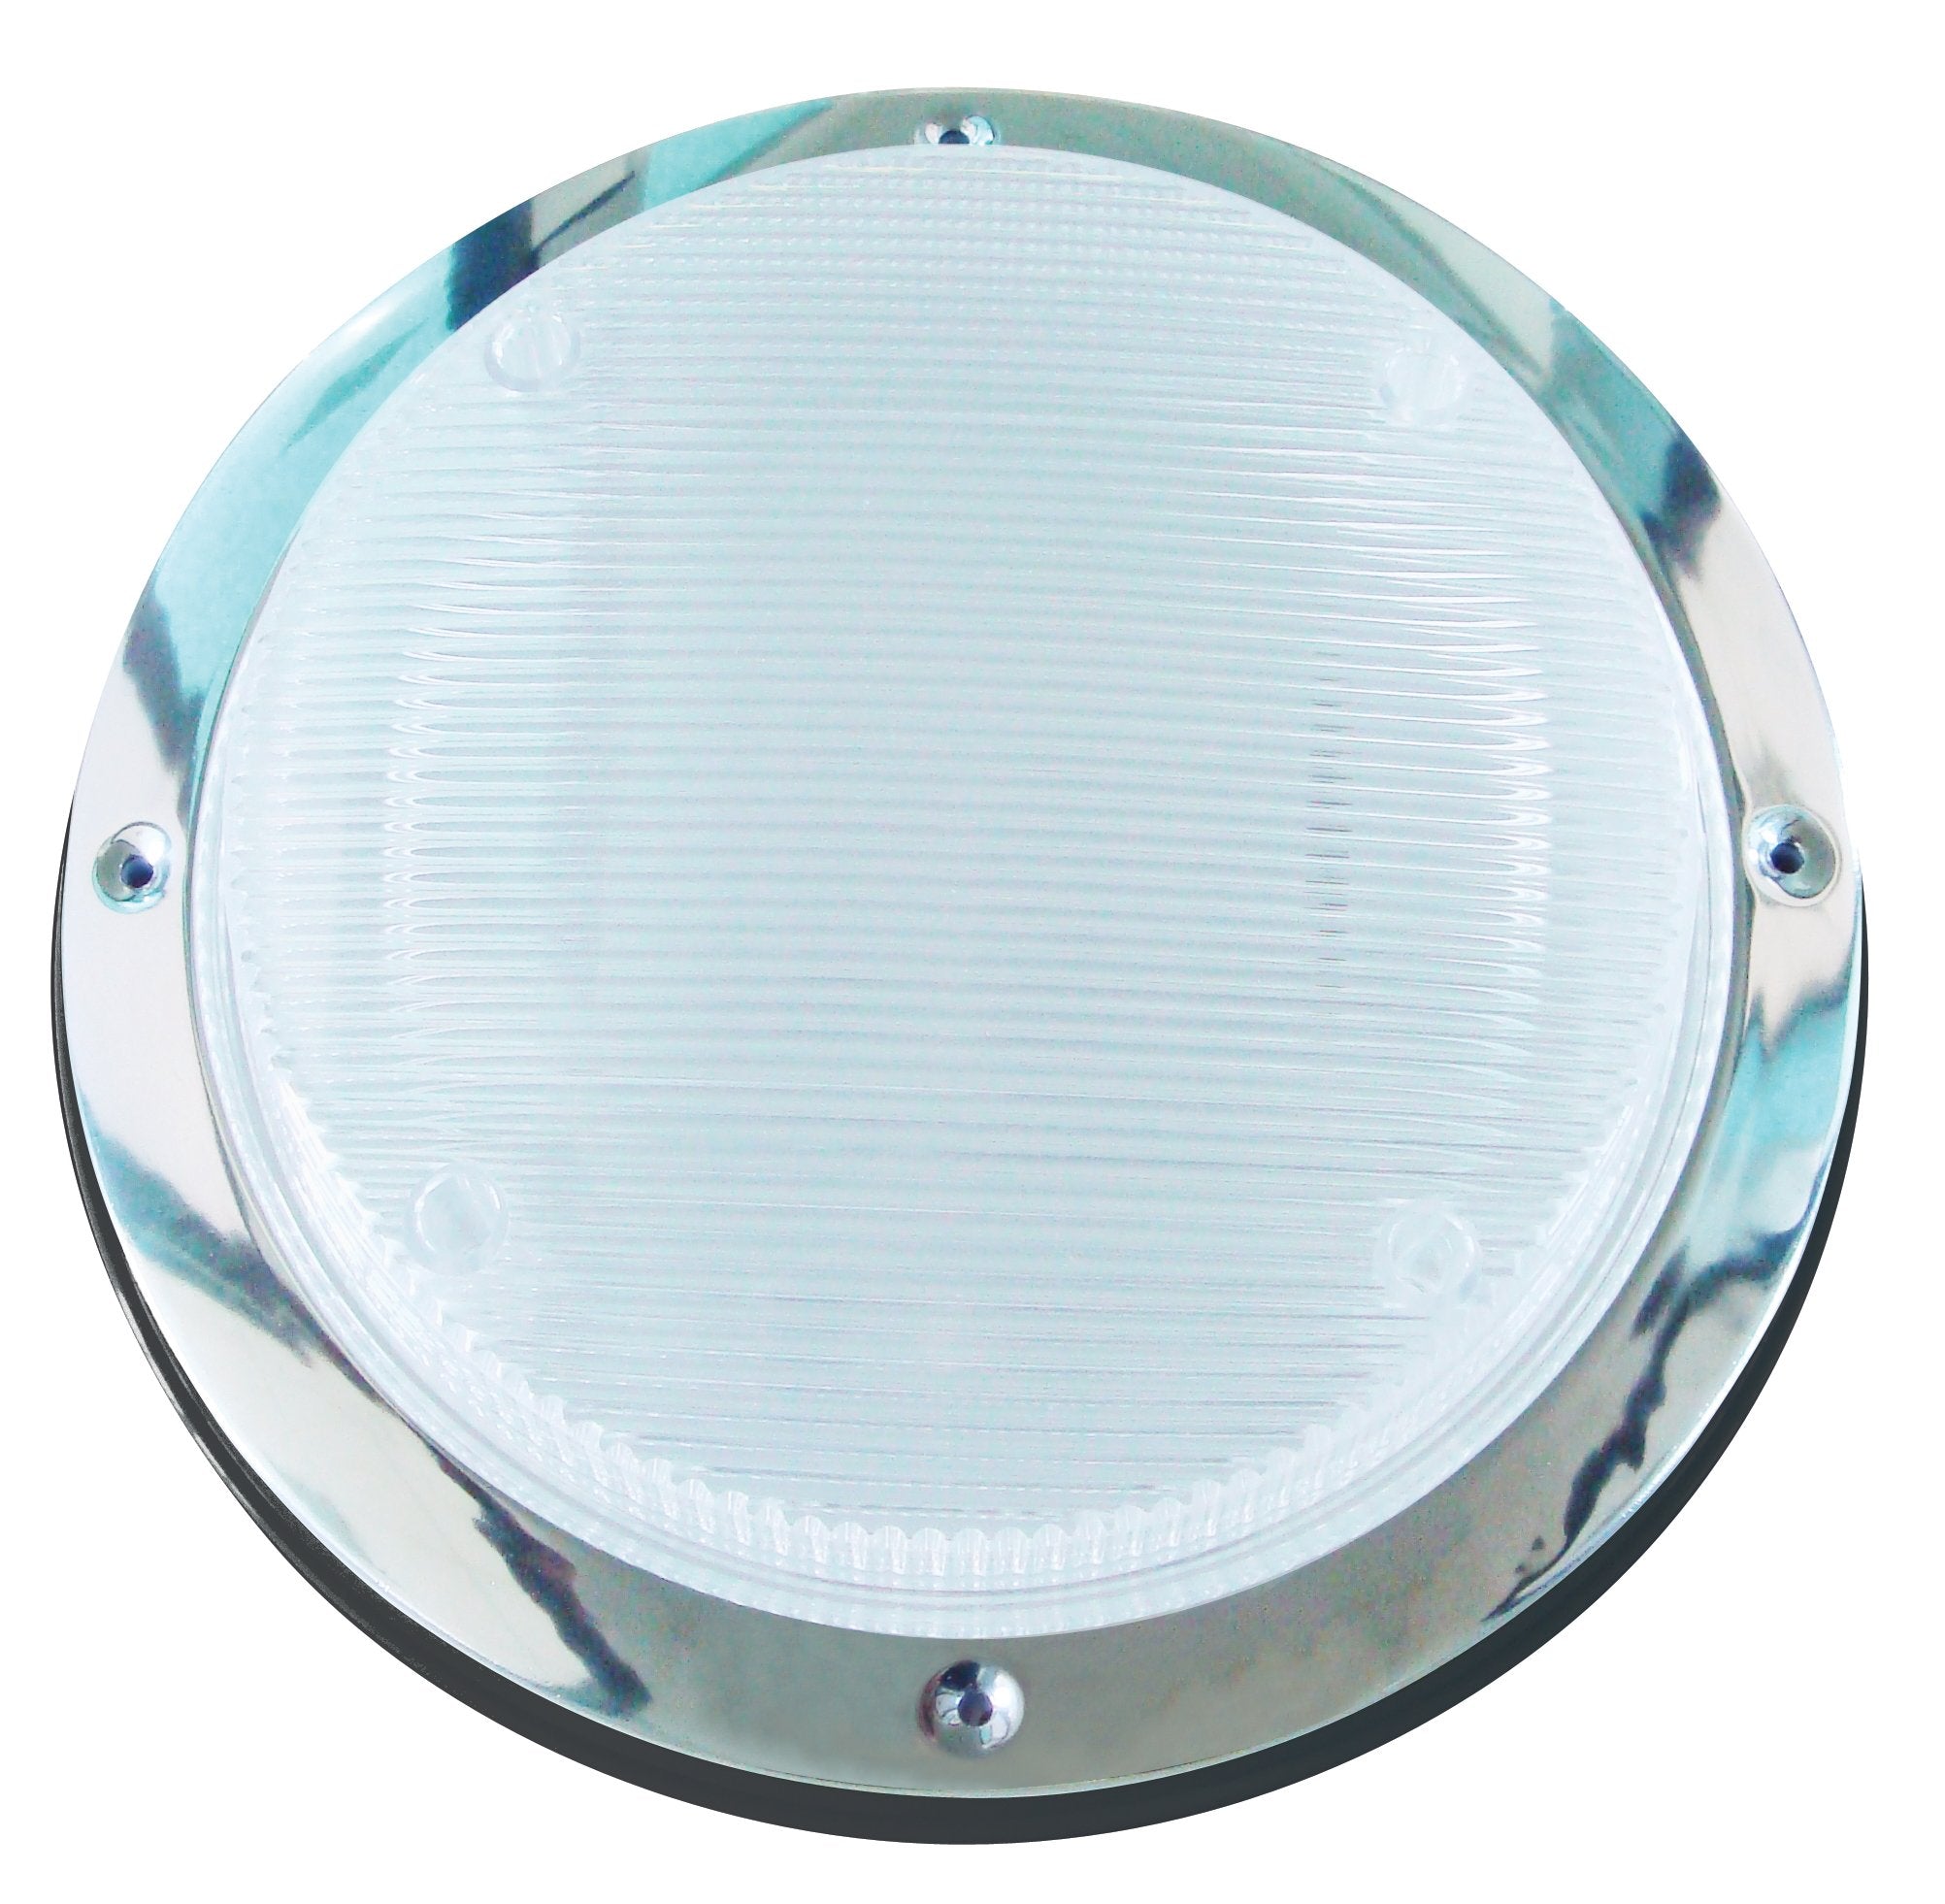 AP Products 016-RSL2000 Star Lights Replacement Scare Light 2000 - White